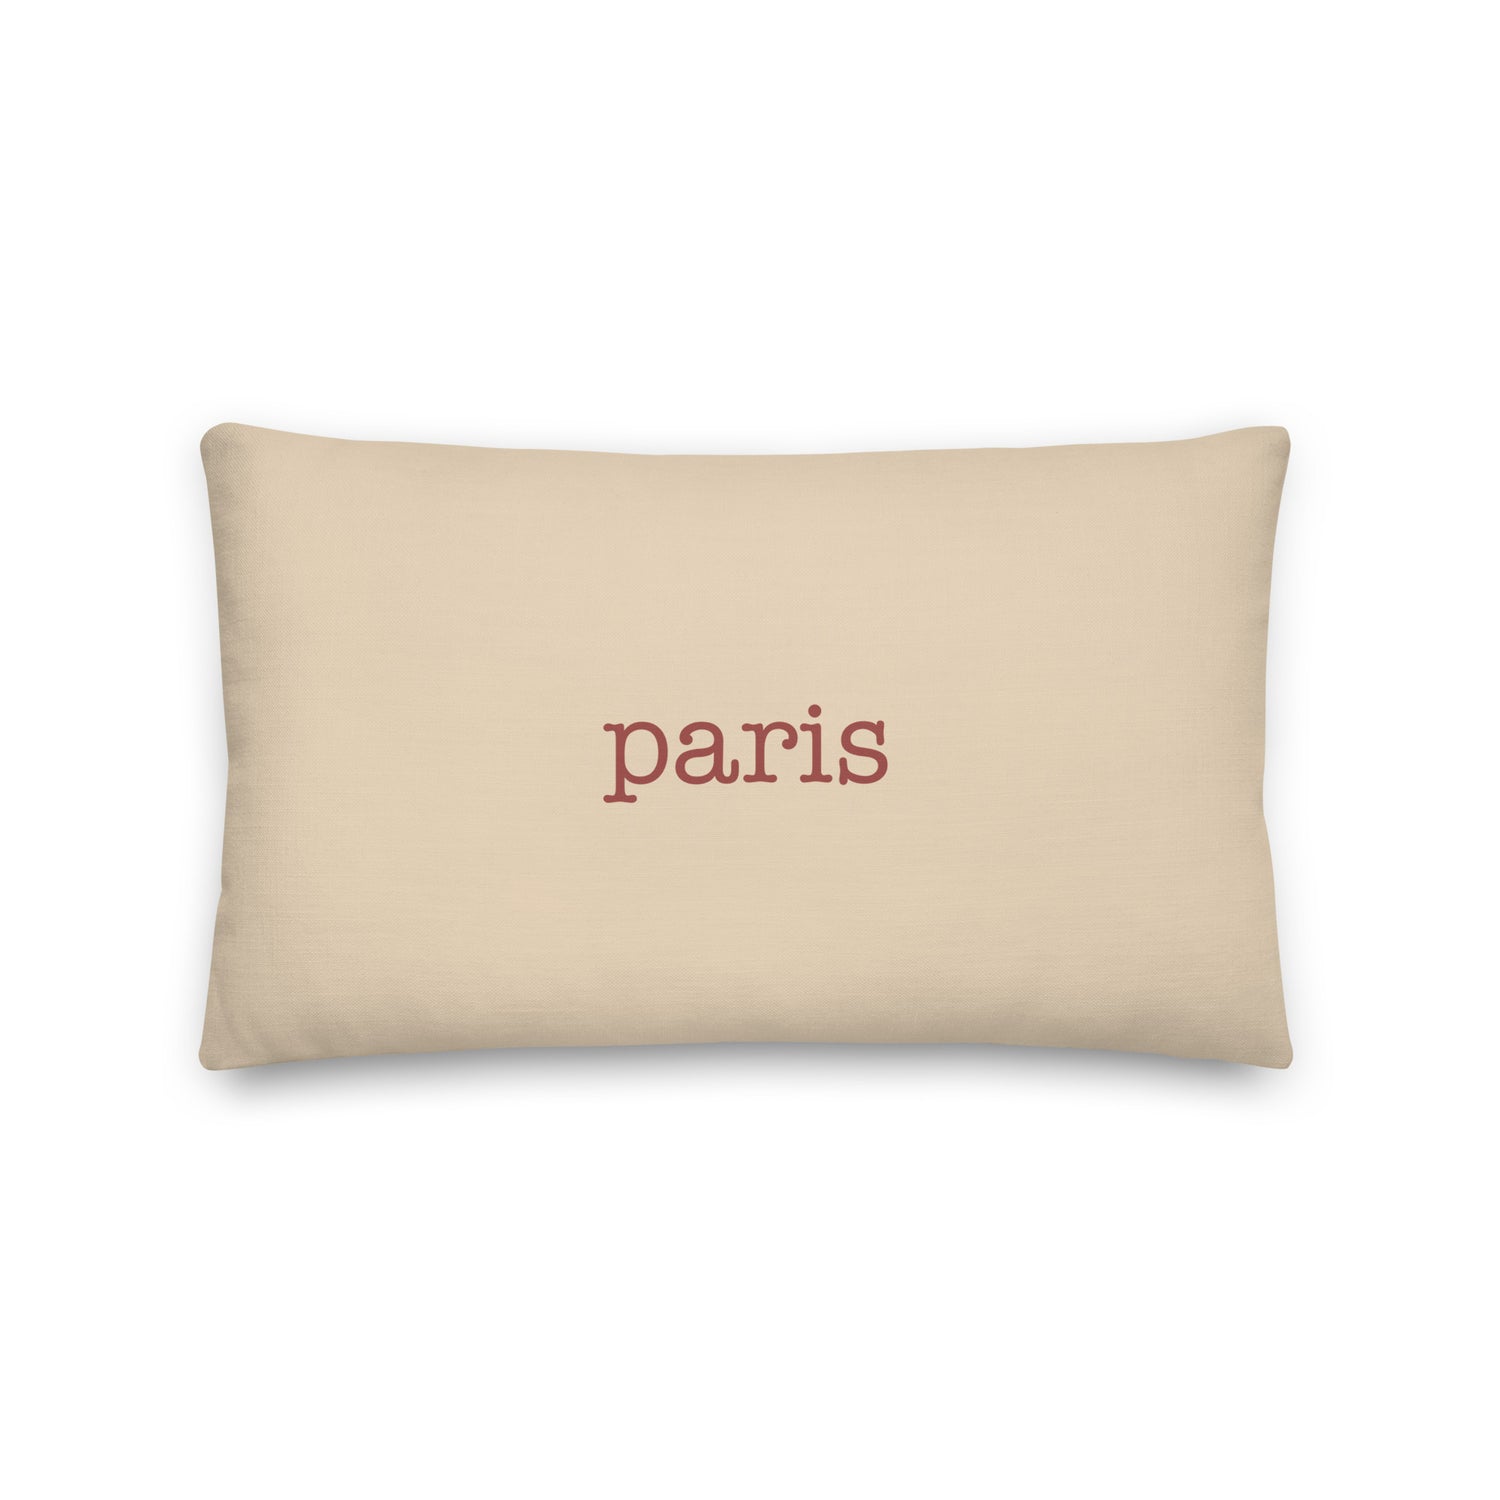 Paris France Pillows and Blankets • CDG Airport Code